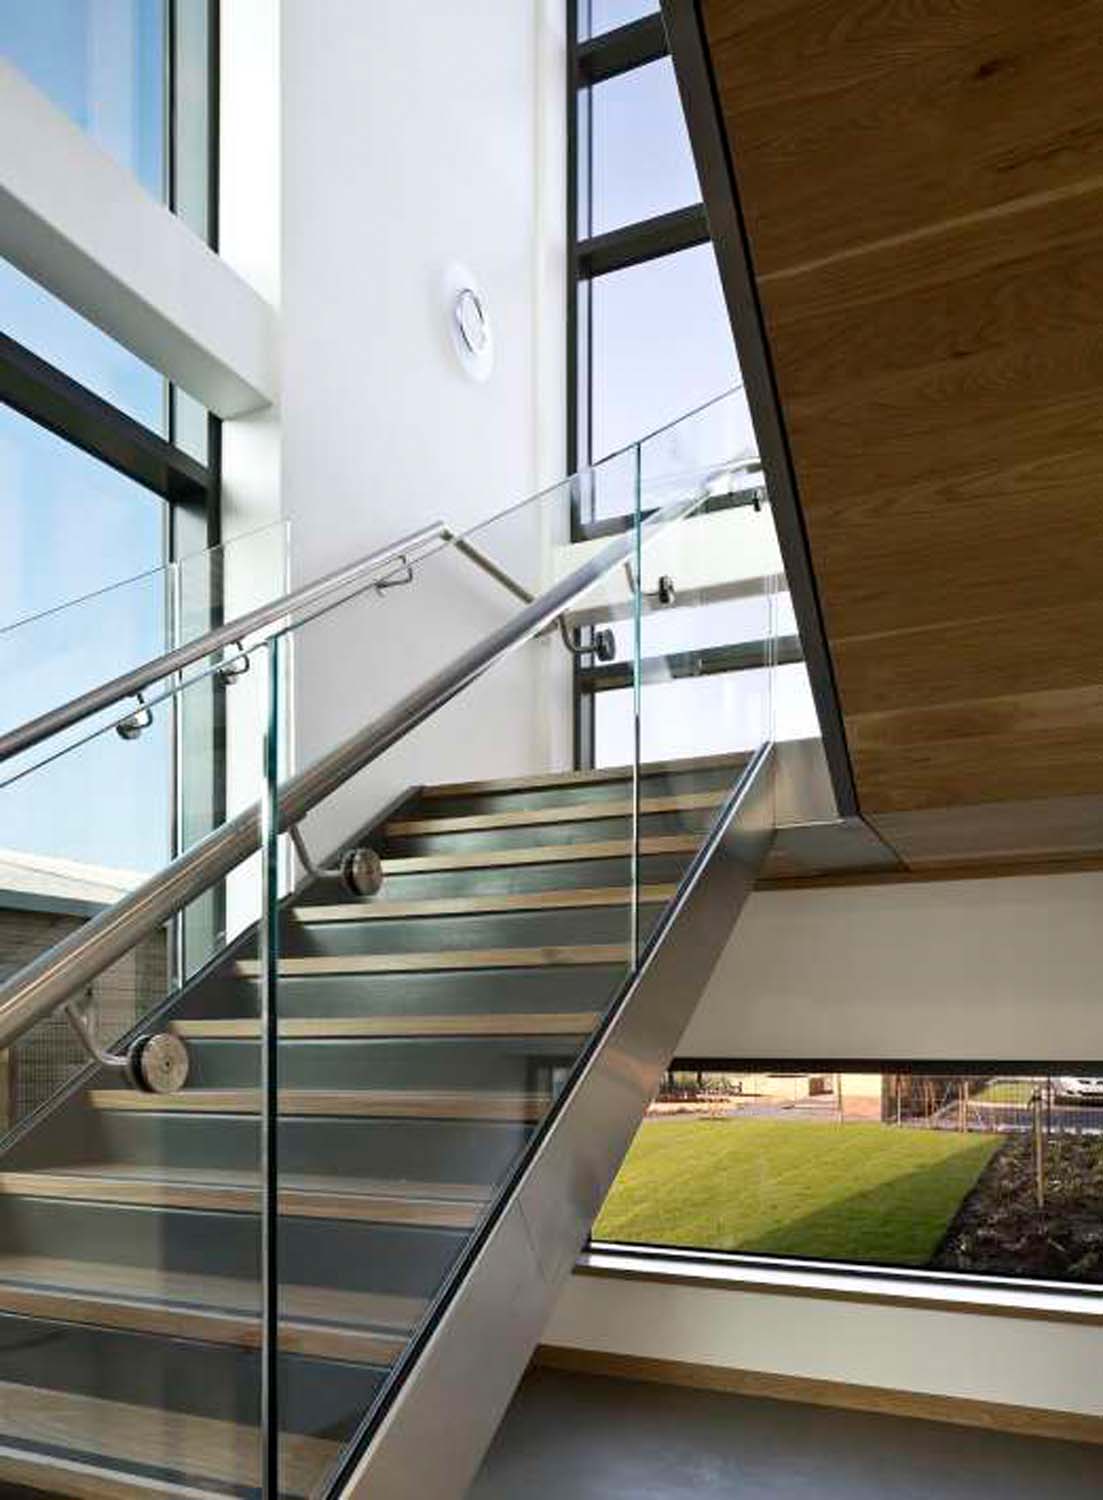 A photograph of a stair case which features a number of windows with a view into green space outdoors